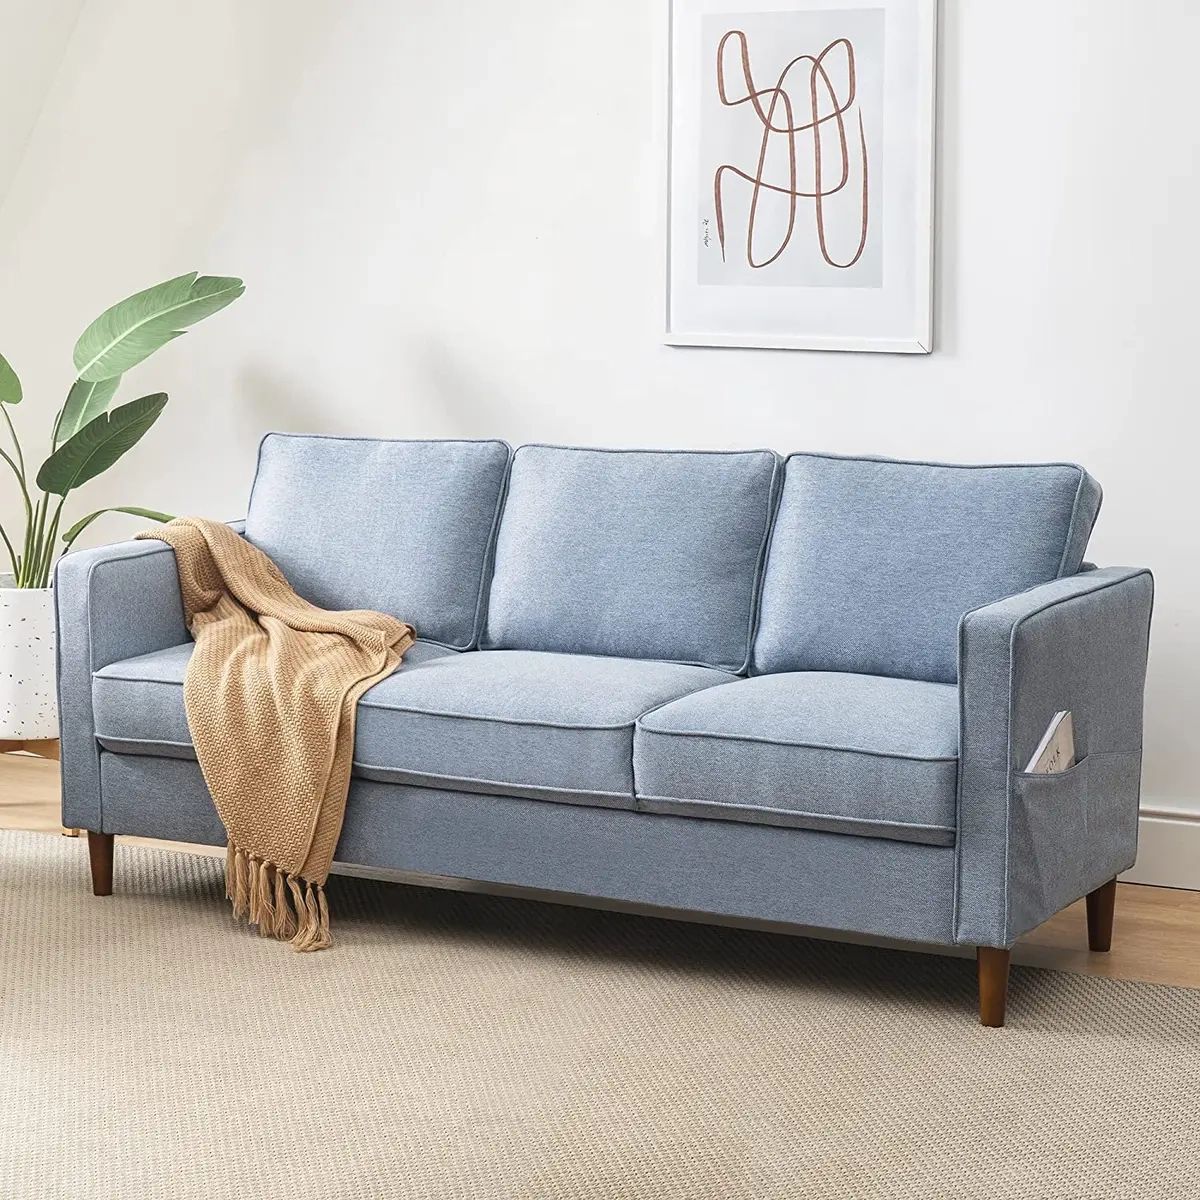 Hana Modern Linen Fabric Loveseat/Sofa/Couch With Armrest Pockets, Dusty  Blue | Ebay With Modern Blue Linen Sofas (View 4 of 15)